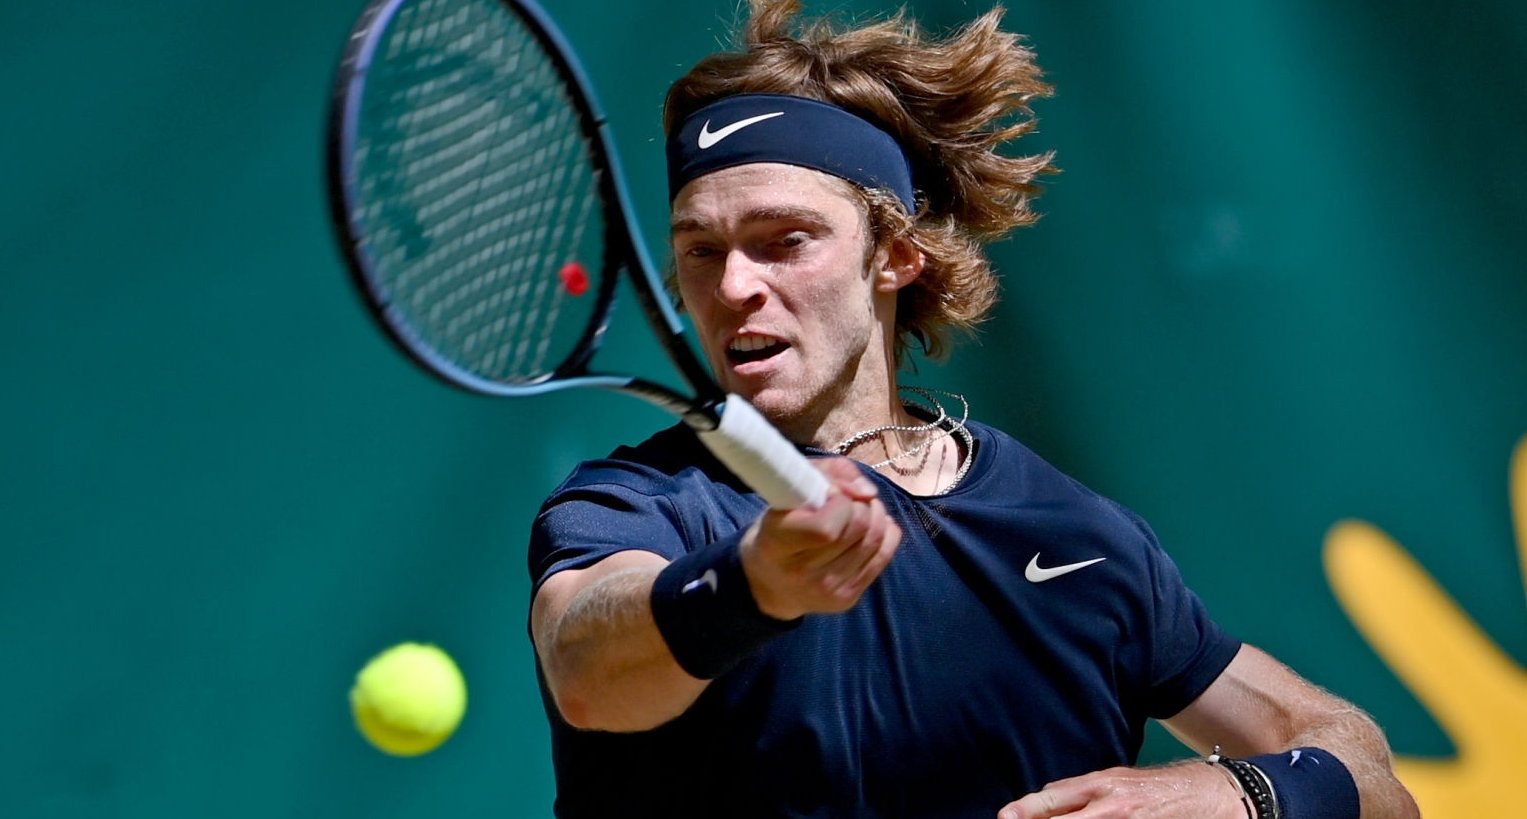 Monte Carlo Masters Highlights Andrey Rublev clinches come-from-behind victory vs Taylor Fritz in semifinal